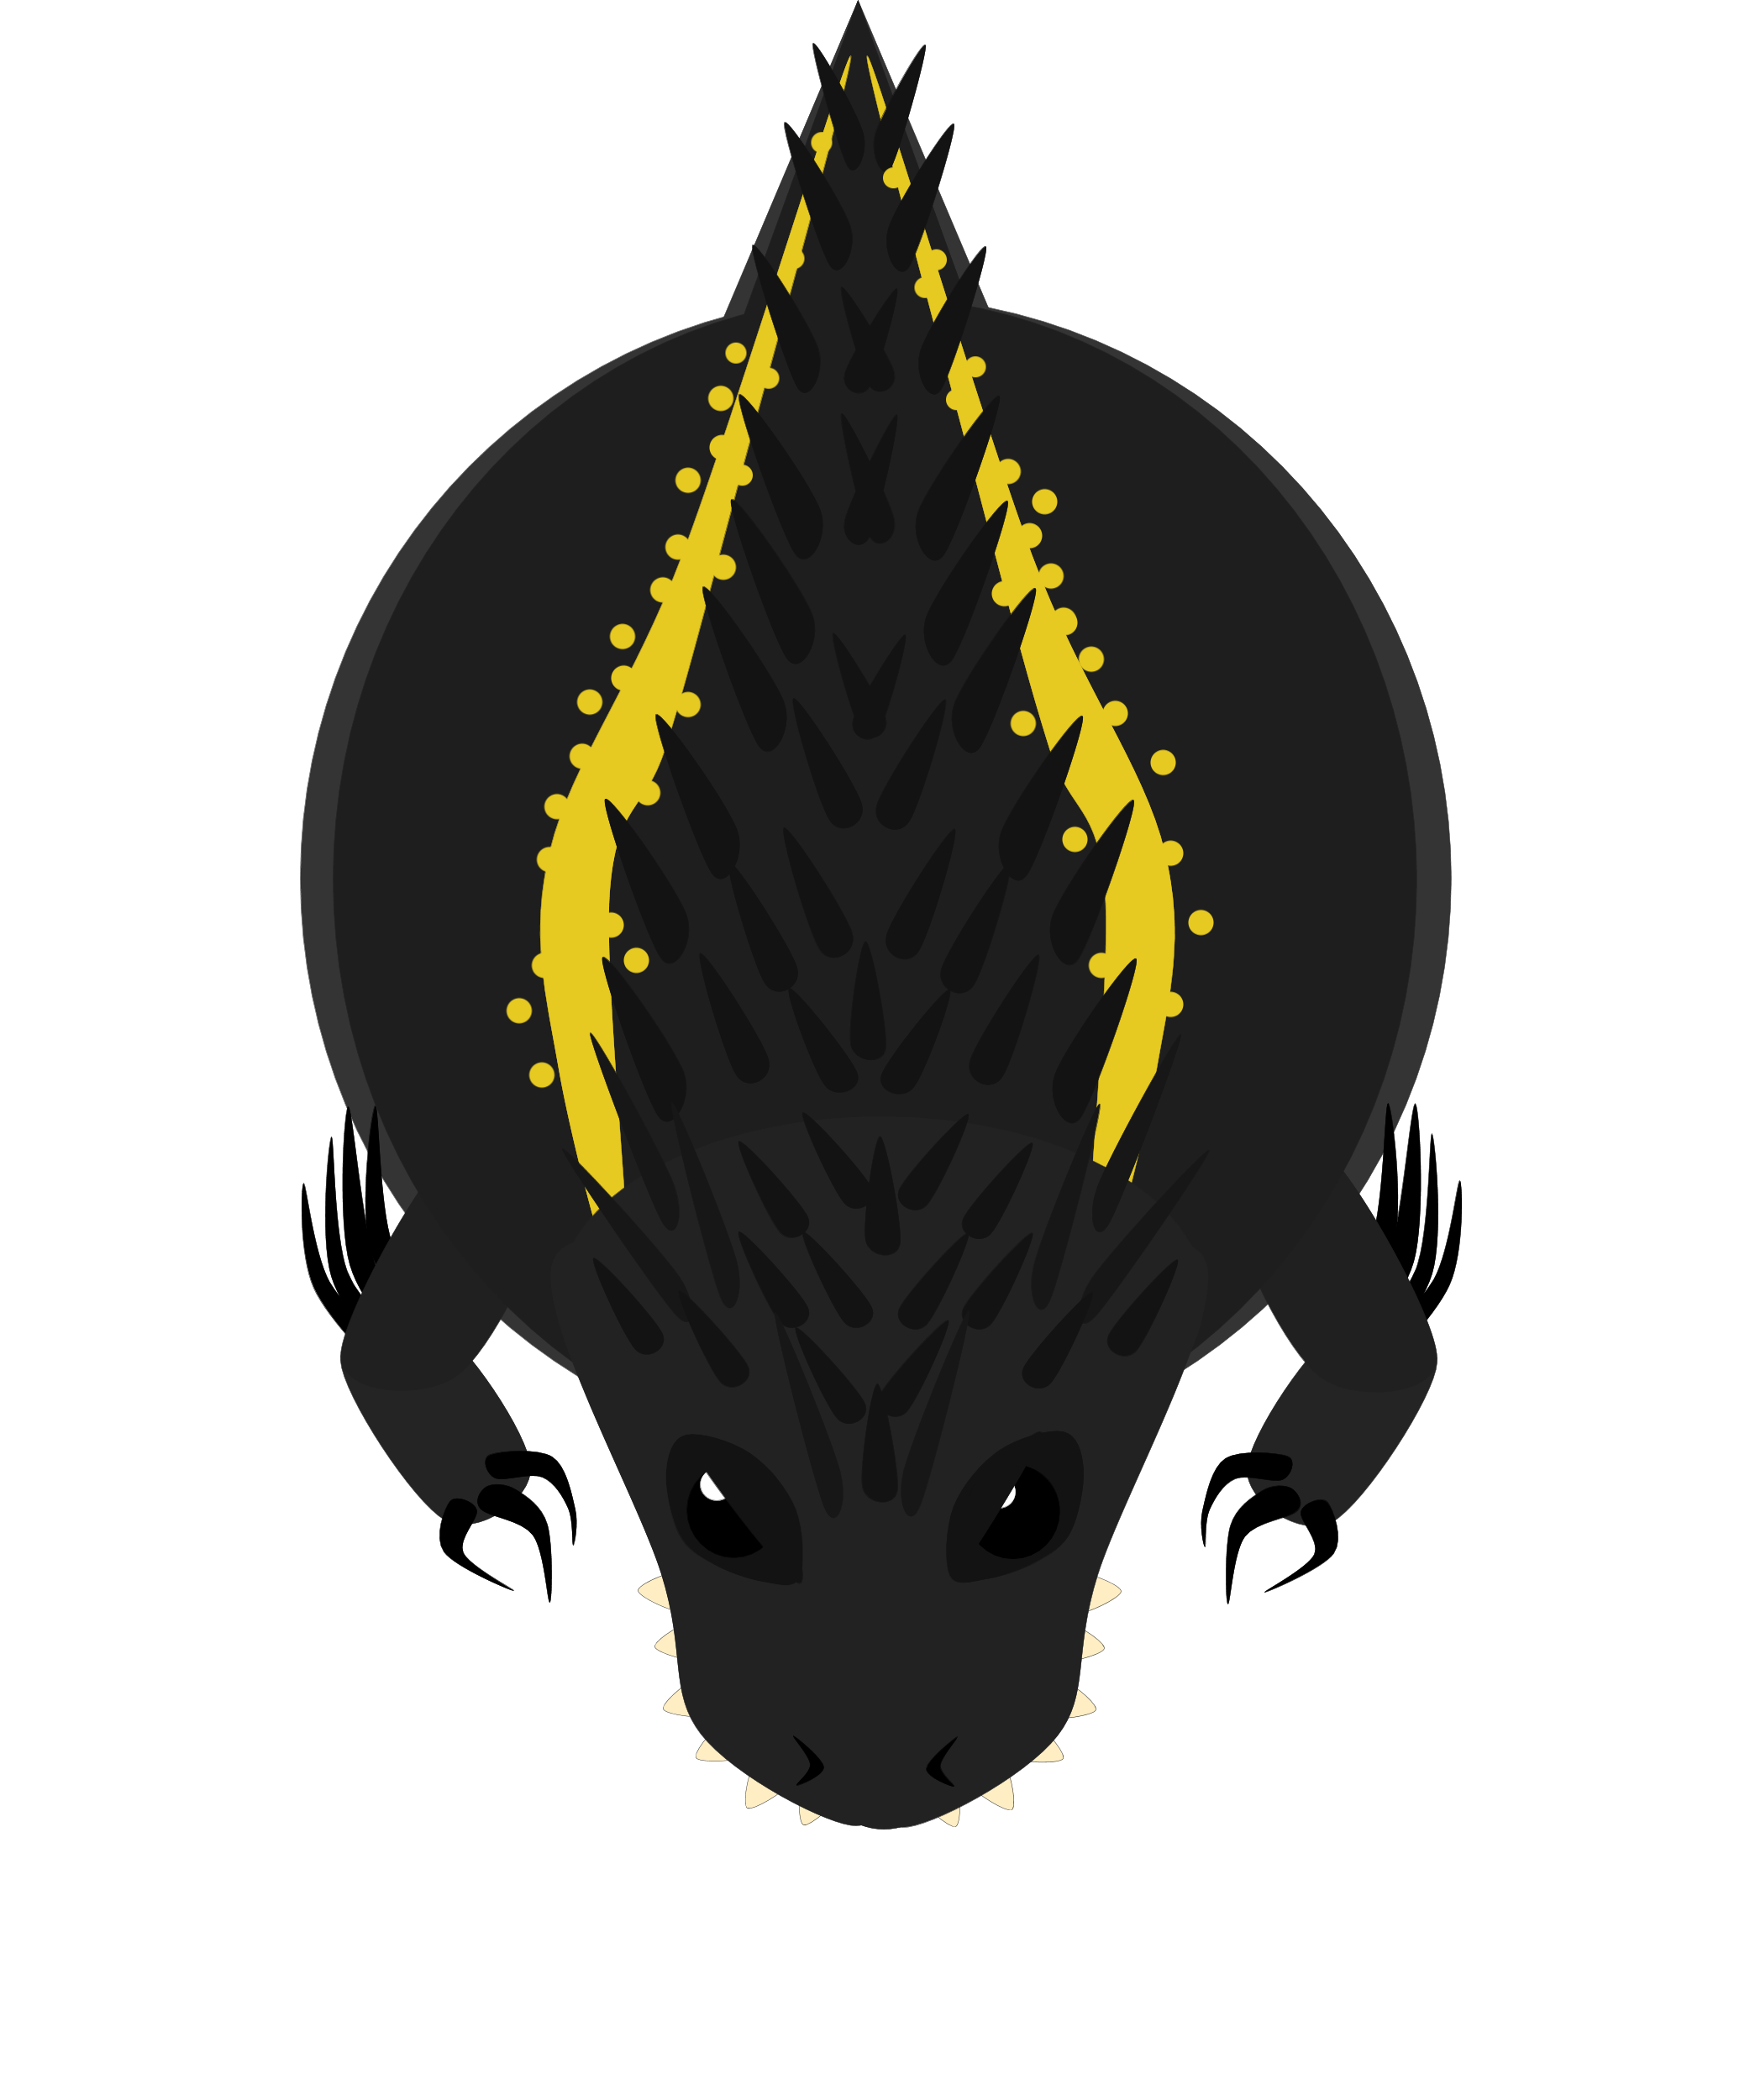 Earth Monster | Mope.io Ofiicial+Conception Wiki | Fandom